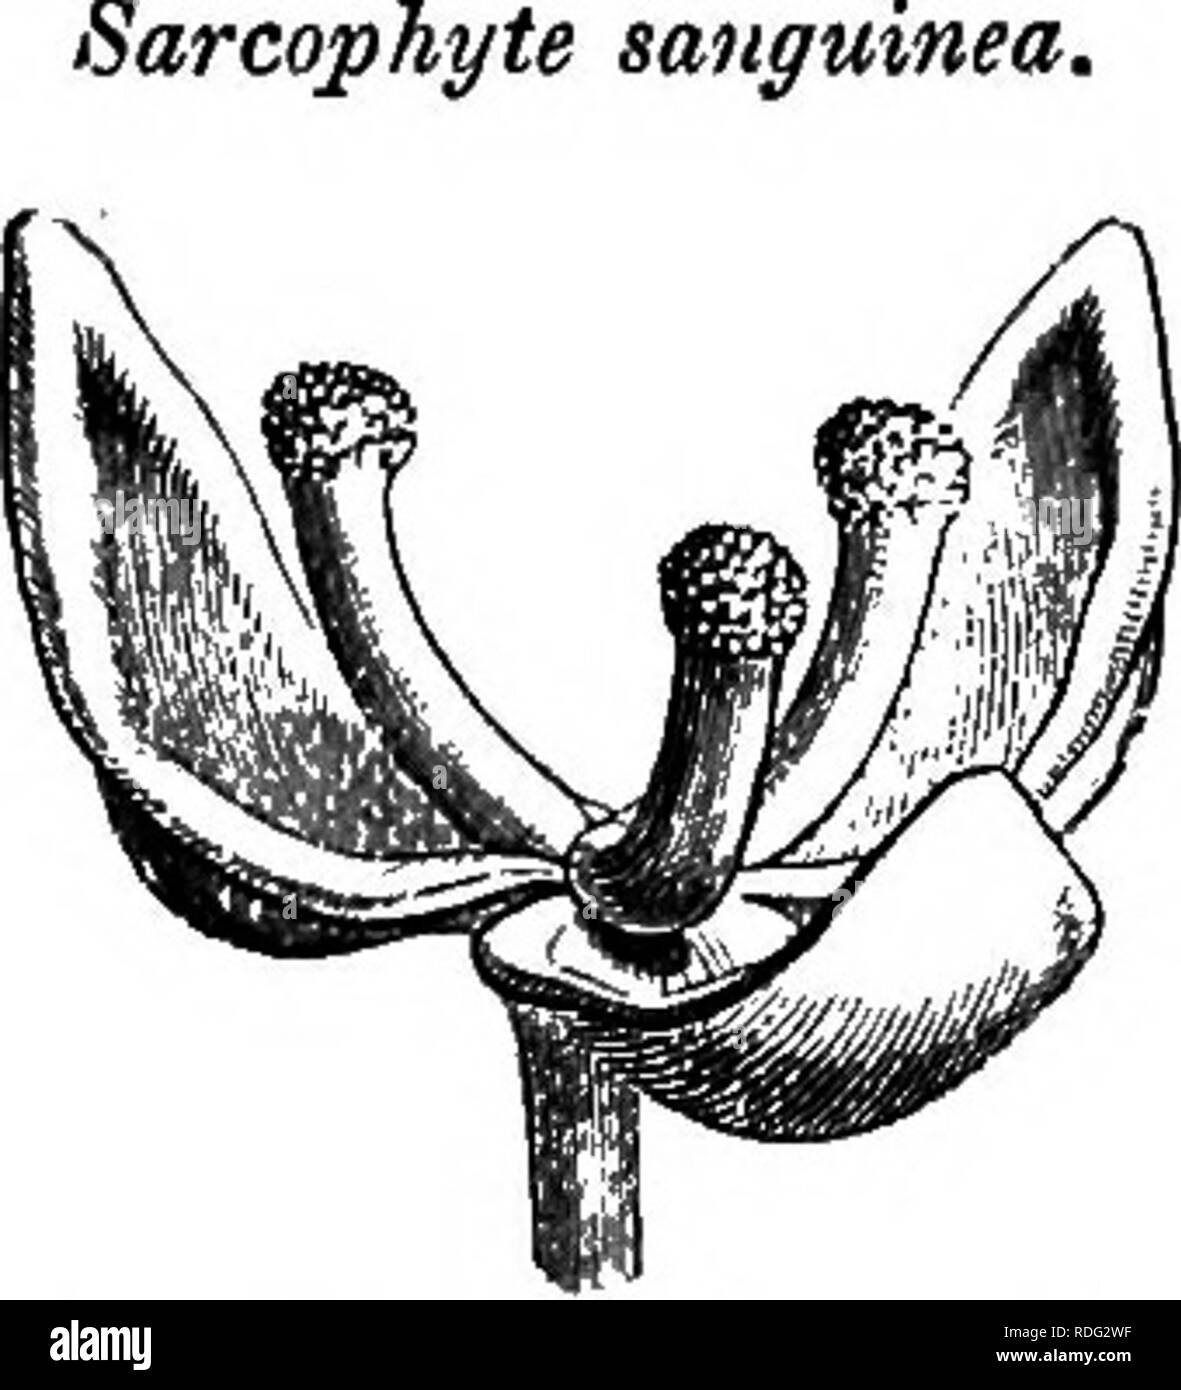 . The natural history of plants. Botany. BALANOPHORA CEM. 505 !Â« aangumea.. Fig. 486. Male flower (5). species of Balanophora have been distinguished, found in the â warm regions of Asia and Oceania.^ Sarcophyte sanguinea,^ a red and fleshy plant, growing at the Cape, parasitic on the roots of Ekehergia and Acacia, would appear to have the same general organization as Balano- phora, but for its much flatter gynsecium and its ovary being sometim^^s uniovulate, sometimes bi- or triovulate. The male flower (fig. 486) is composed of three or four val- vate sepals and an equal number of super- pos Stock Photo